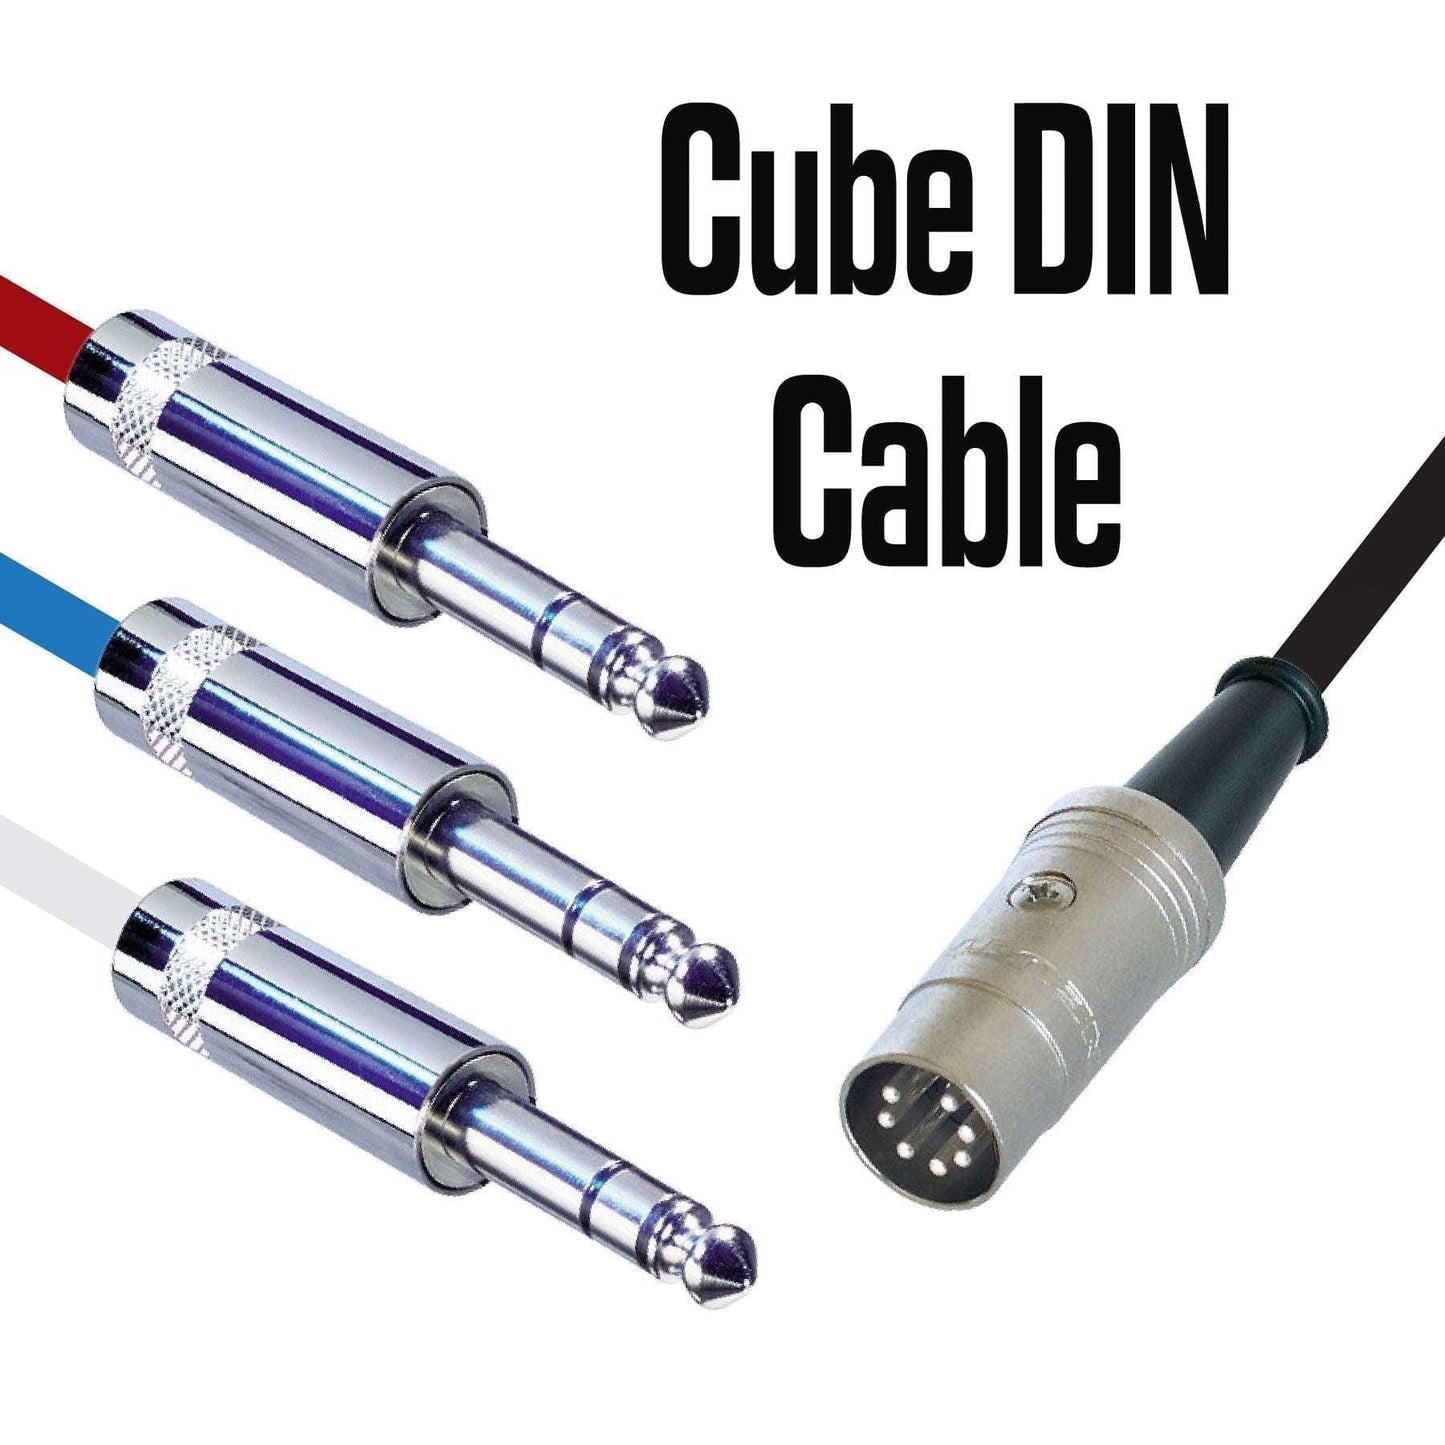 1m Cube DIN Cable